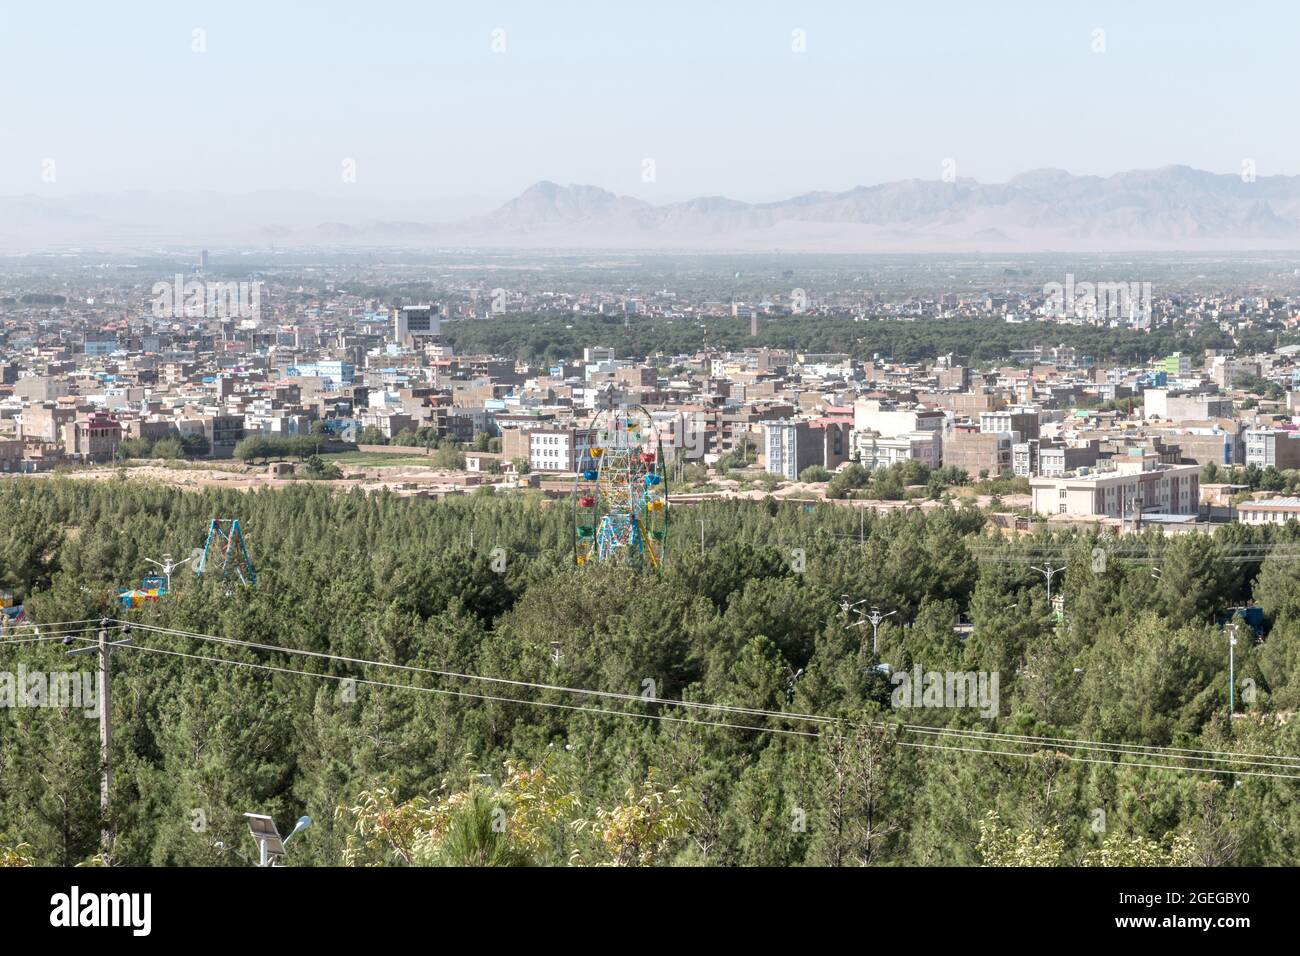 View on the city of Herat, Afghanistan Stock Photo